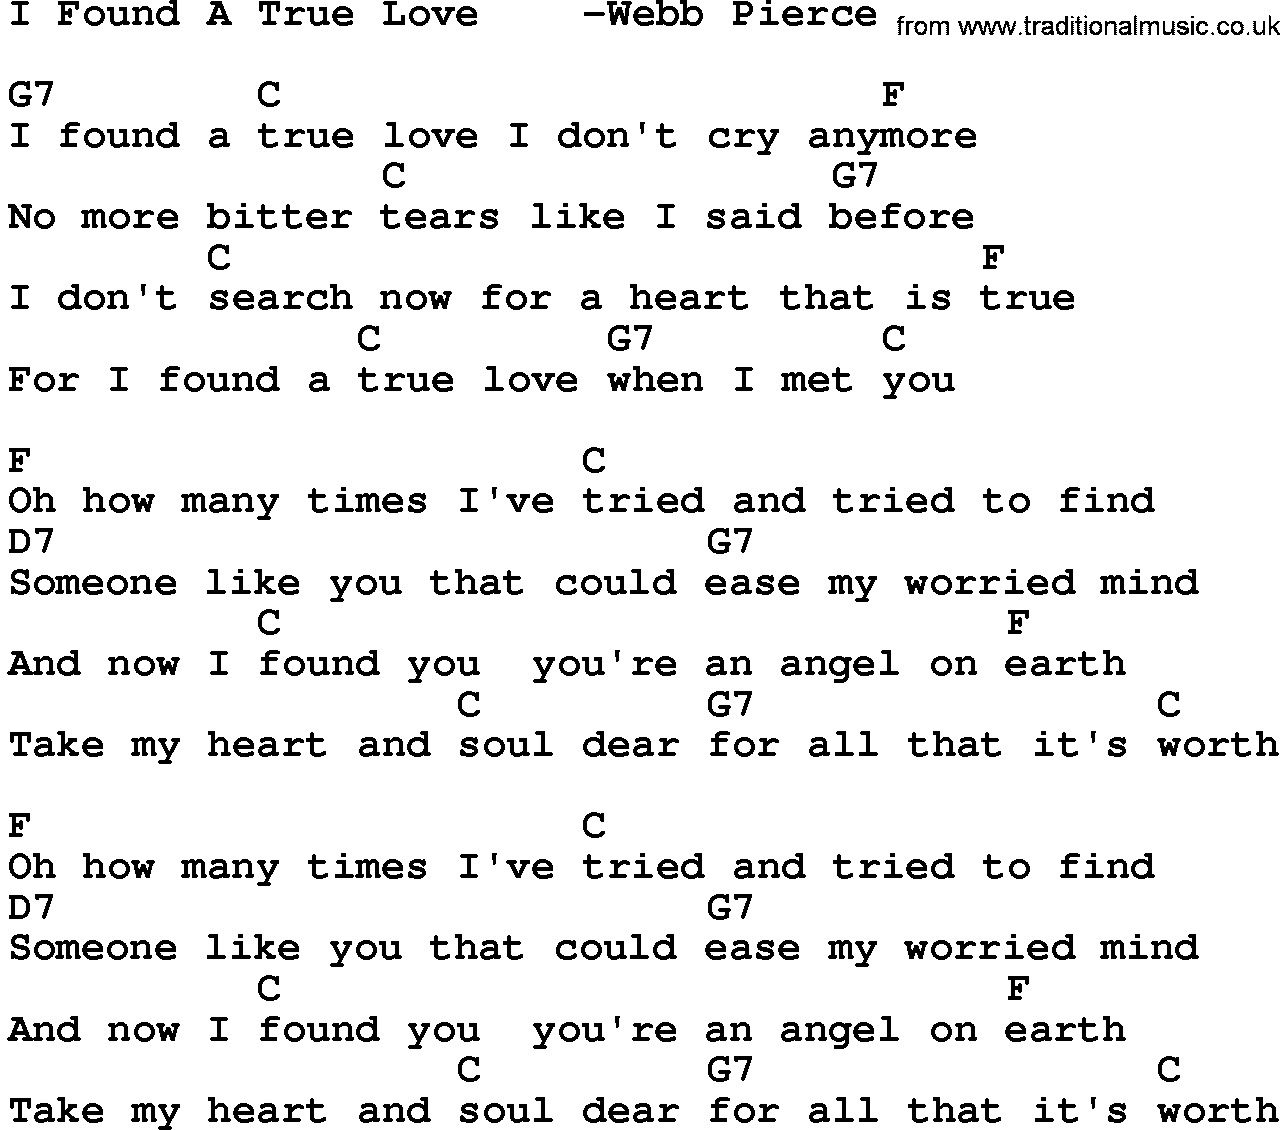 Country music song: I Found A True Love -Webb Pierce lyrics and chords